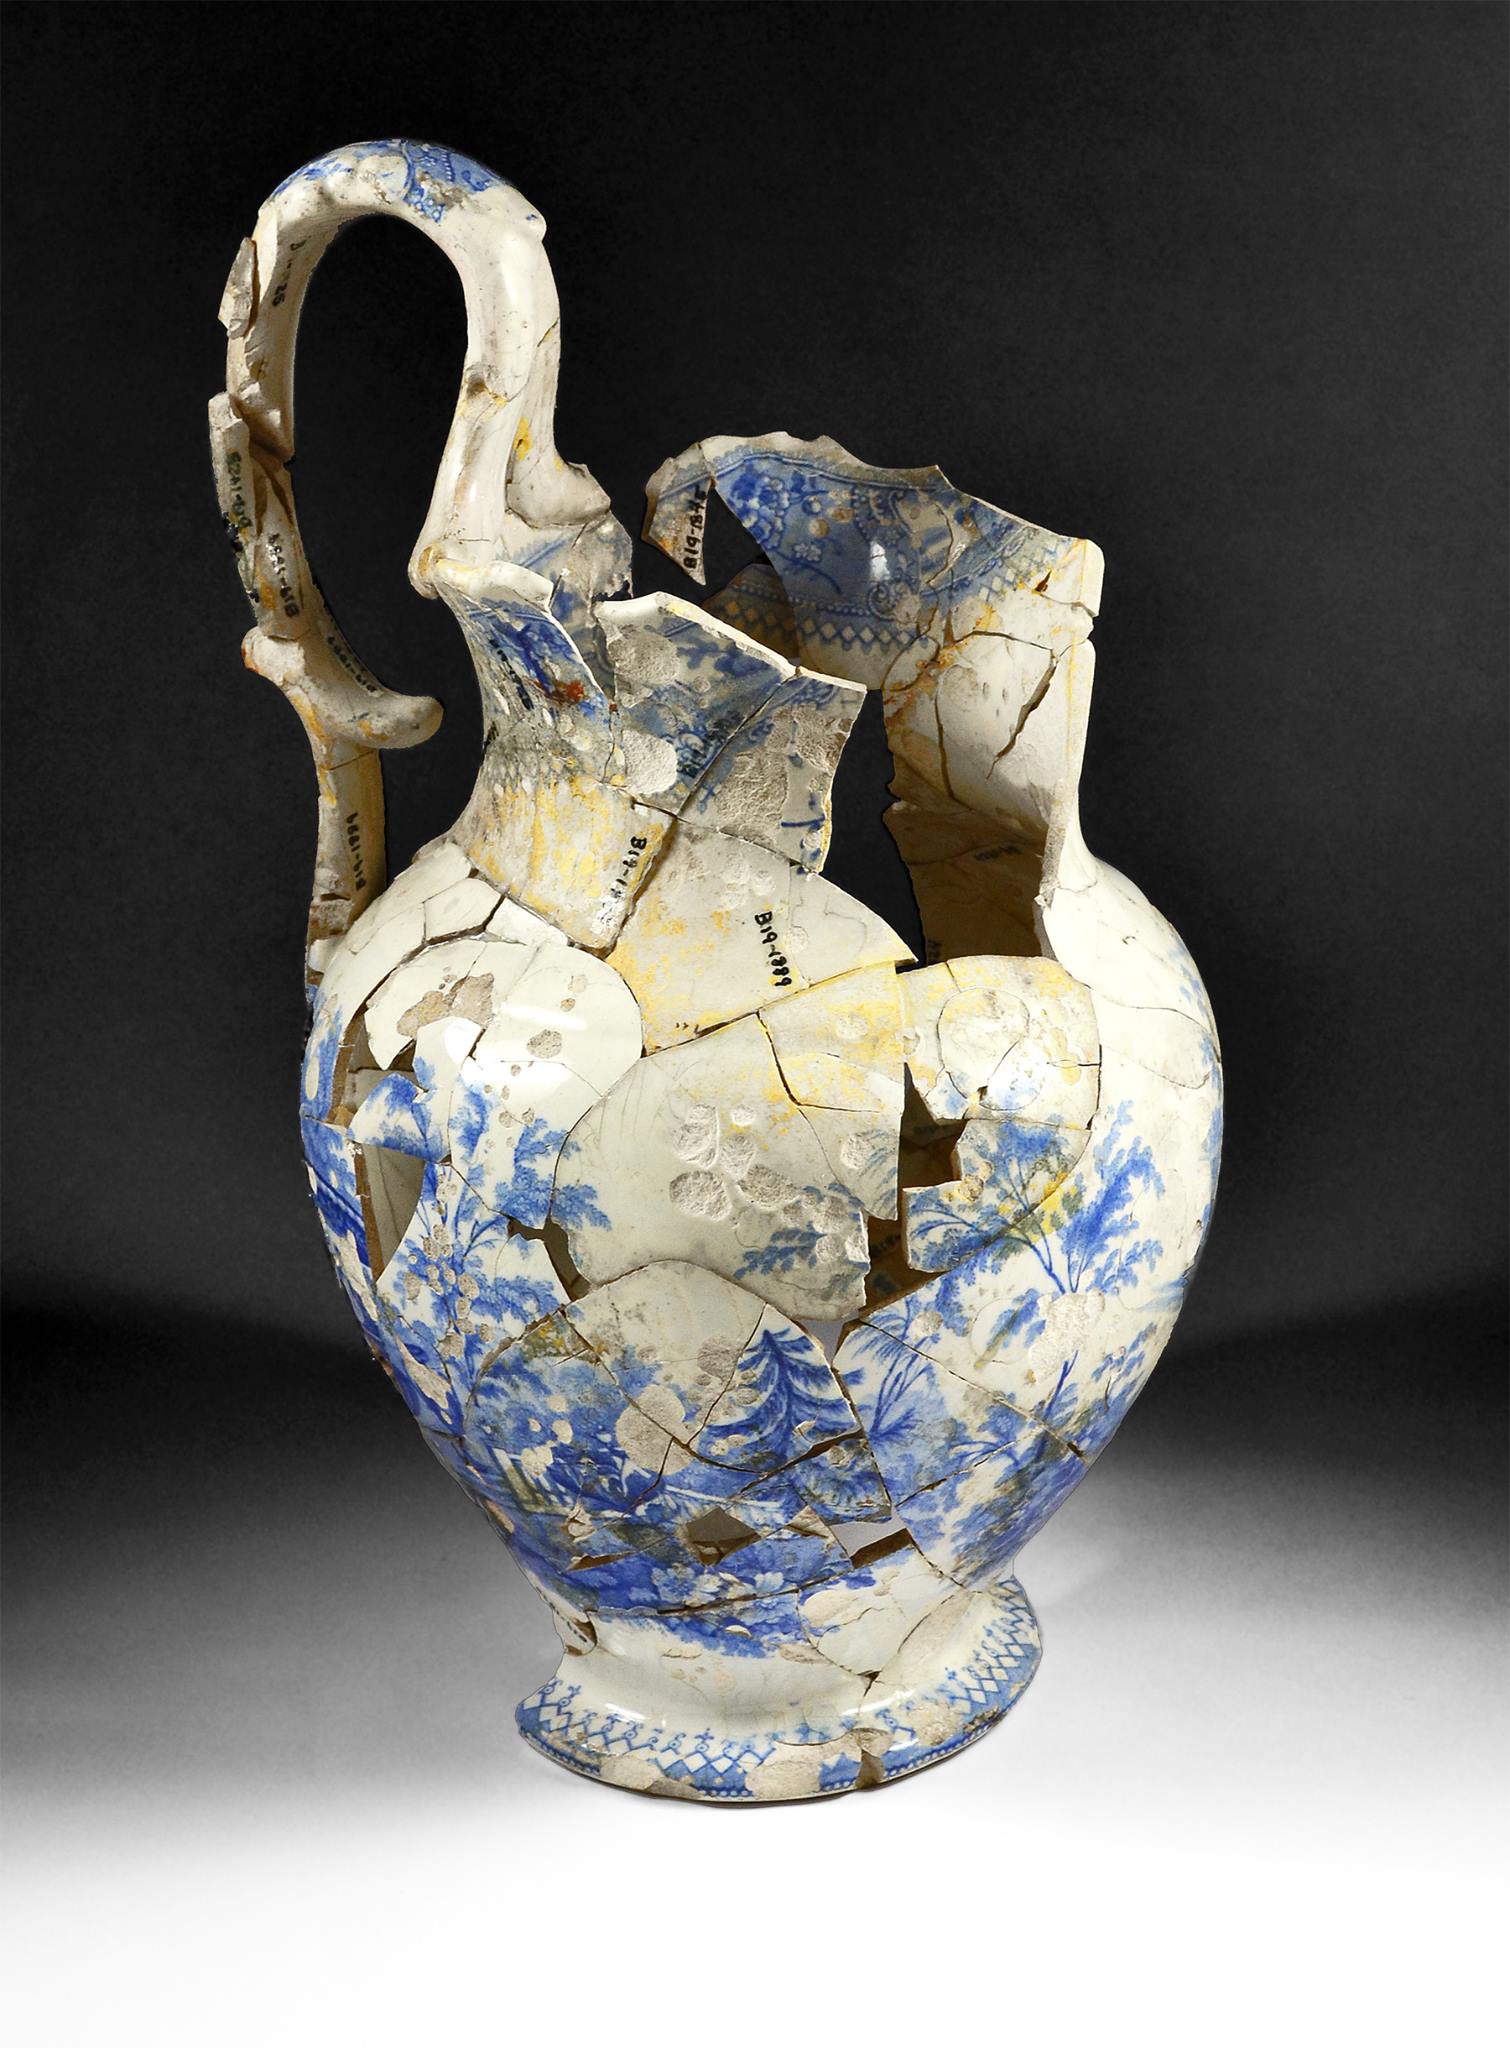 Large ceramic jug recovered from Brook Farm in West Roxbury. It was recovered in pieces by archaeologists and glued back together. It is overall white ceramic with a pale blue printed decoration on the exterior with plants and an urn. It is taller than it is wide, at 12 inches tall and six inches wide with a large handle that sticks up above its rim. The spout of the jug is missing and there are several holes in the body from missing pieces of ceramic